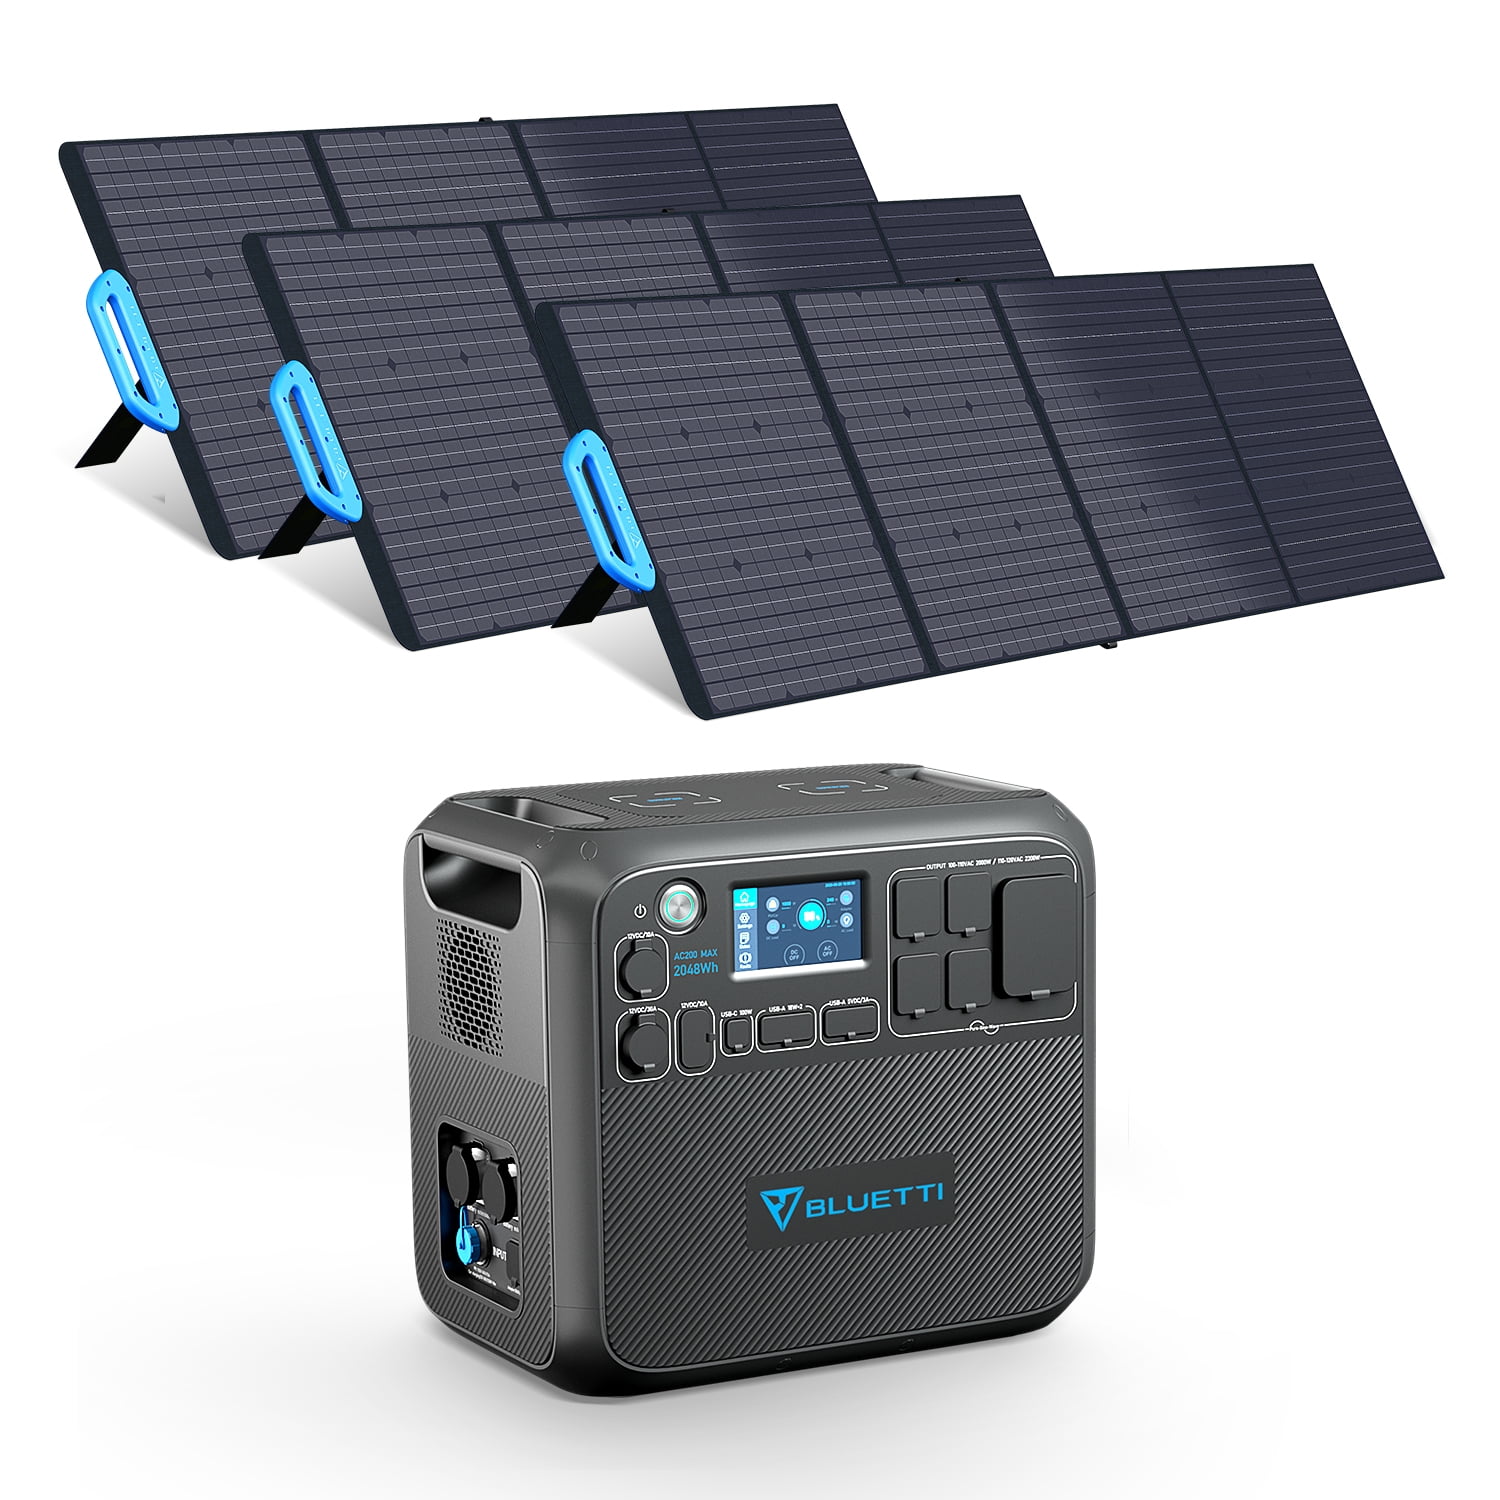 Amazon.com : BLUETTI Portable Power Station with Solar Panel included AC50S 500Wh Solar Generator 120V AC Outlet Lithium Battery Backup for Camping Trip RV Home Emergency(Include 1Pcs 120W Foldable Solar Panel) :